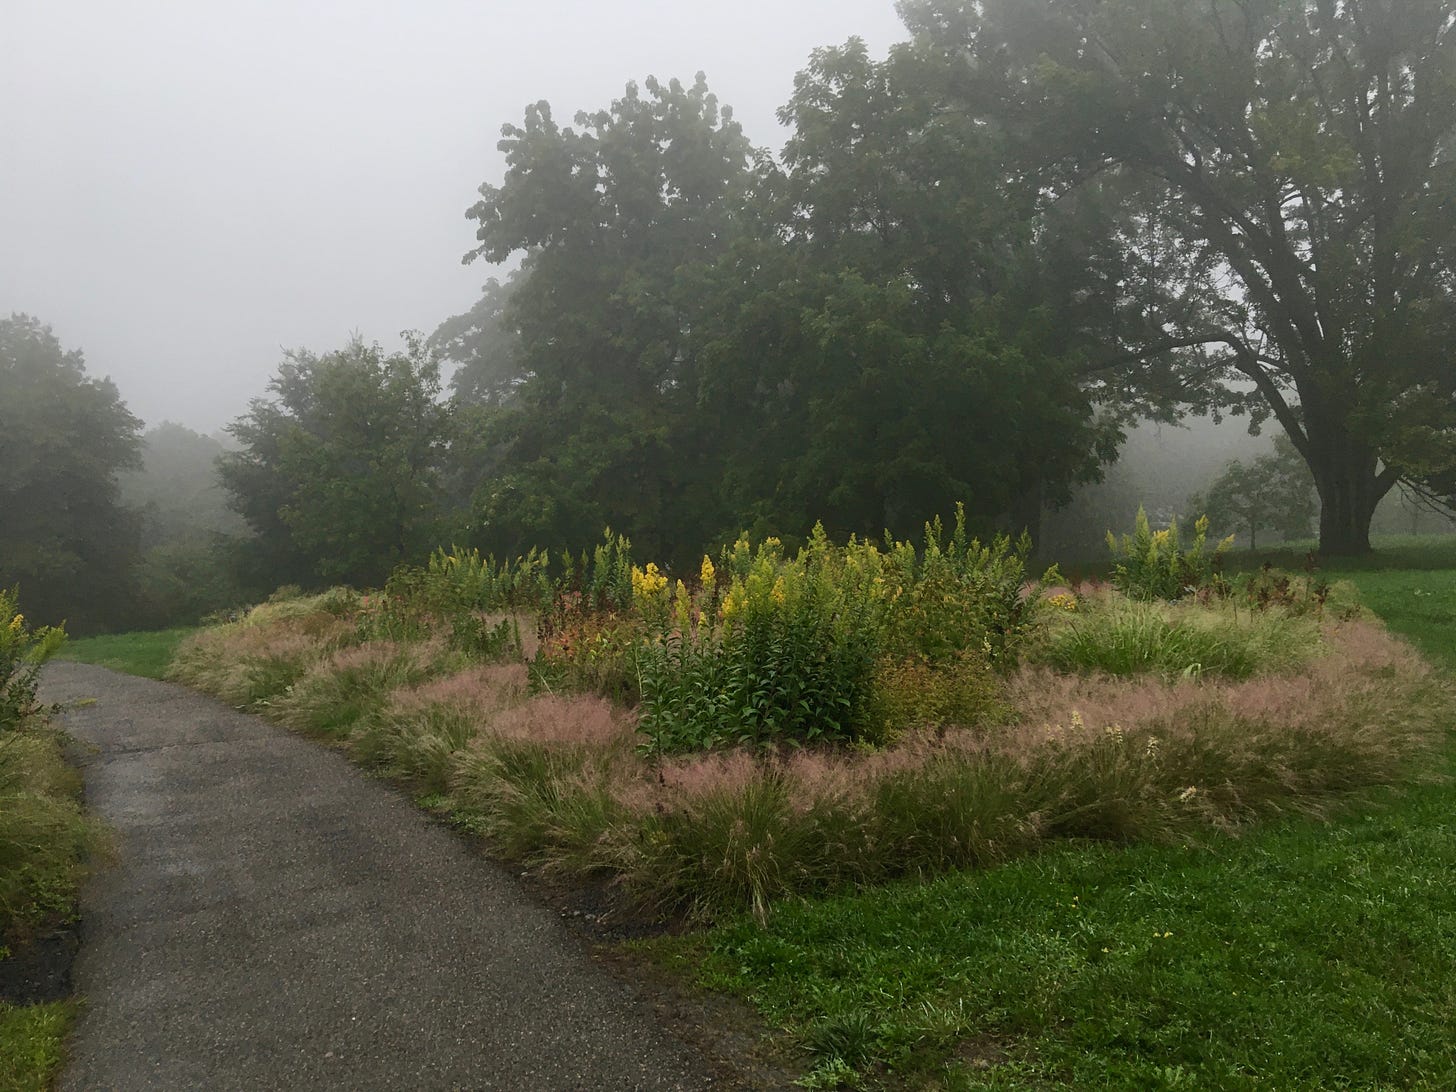 A patch of wildflowers surrounded by trees beside a paved path. The sky is gray and there is fog in the distance.